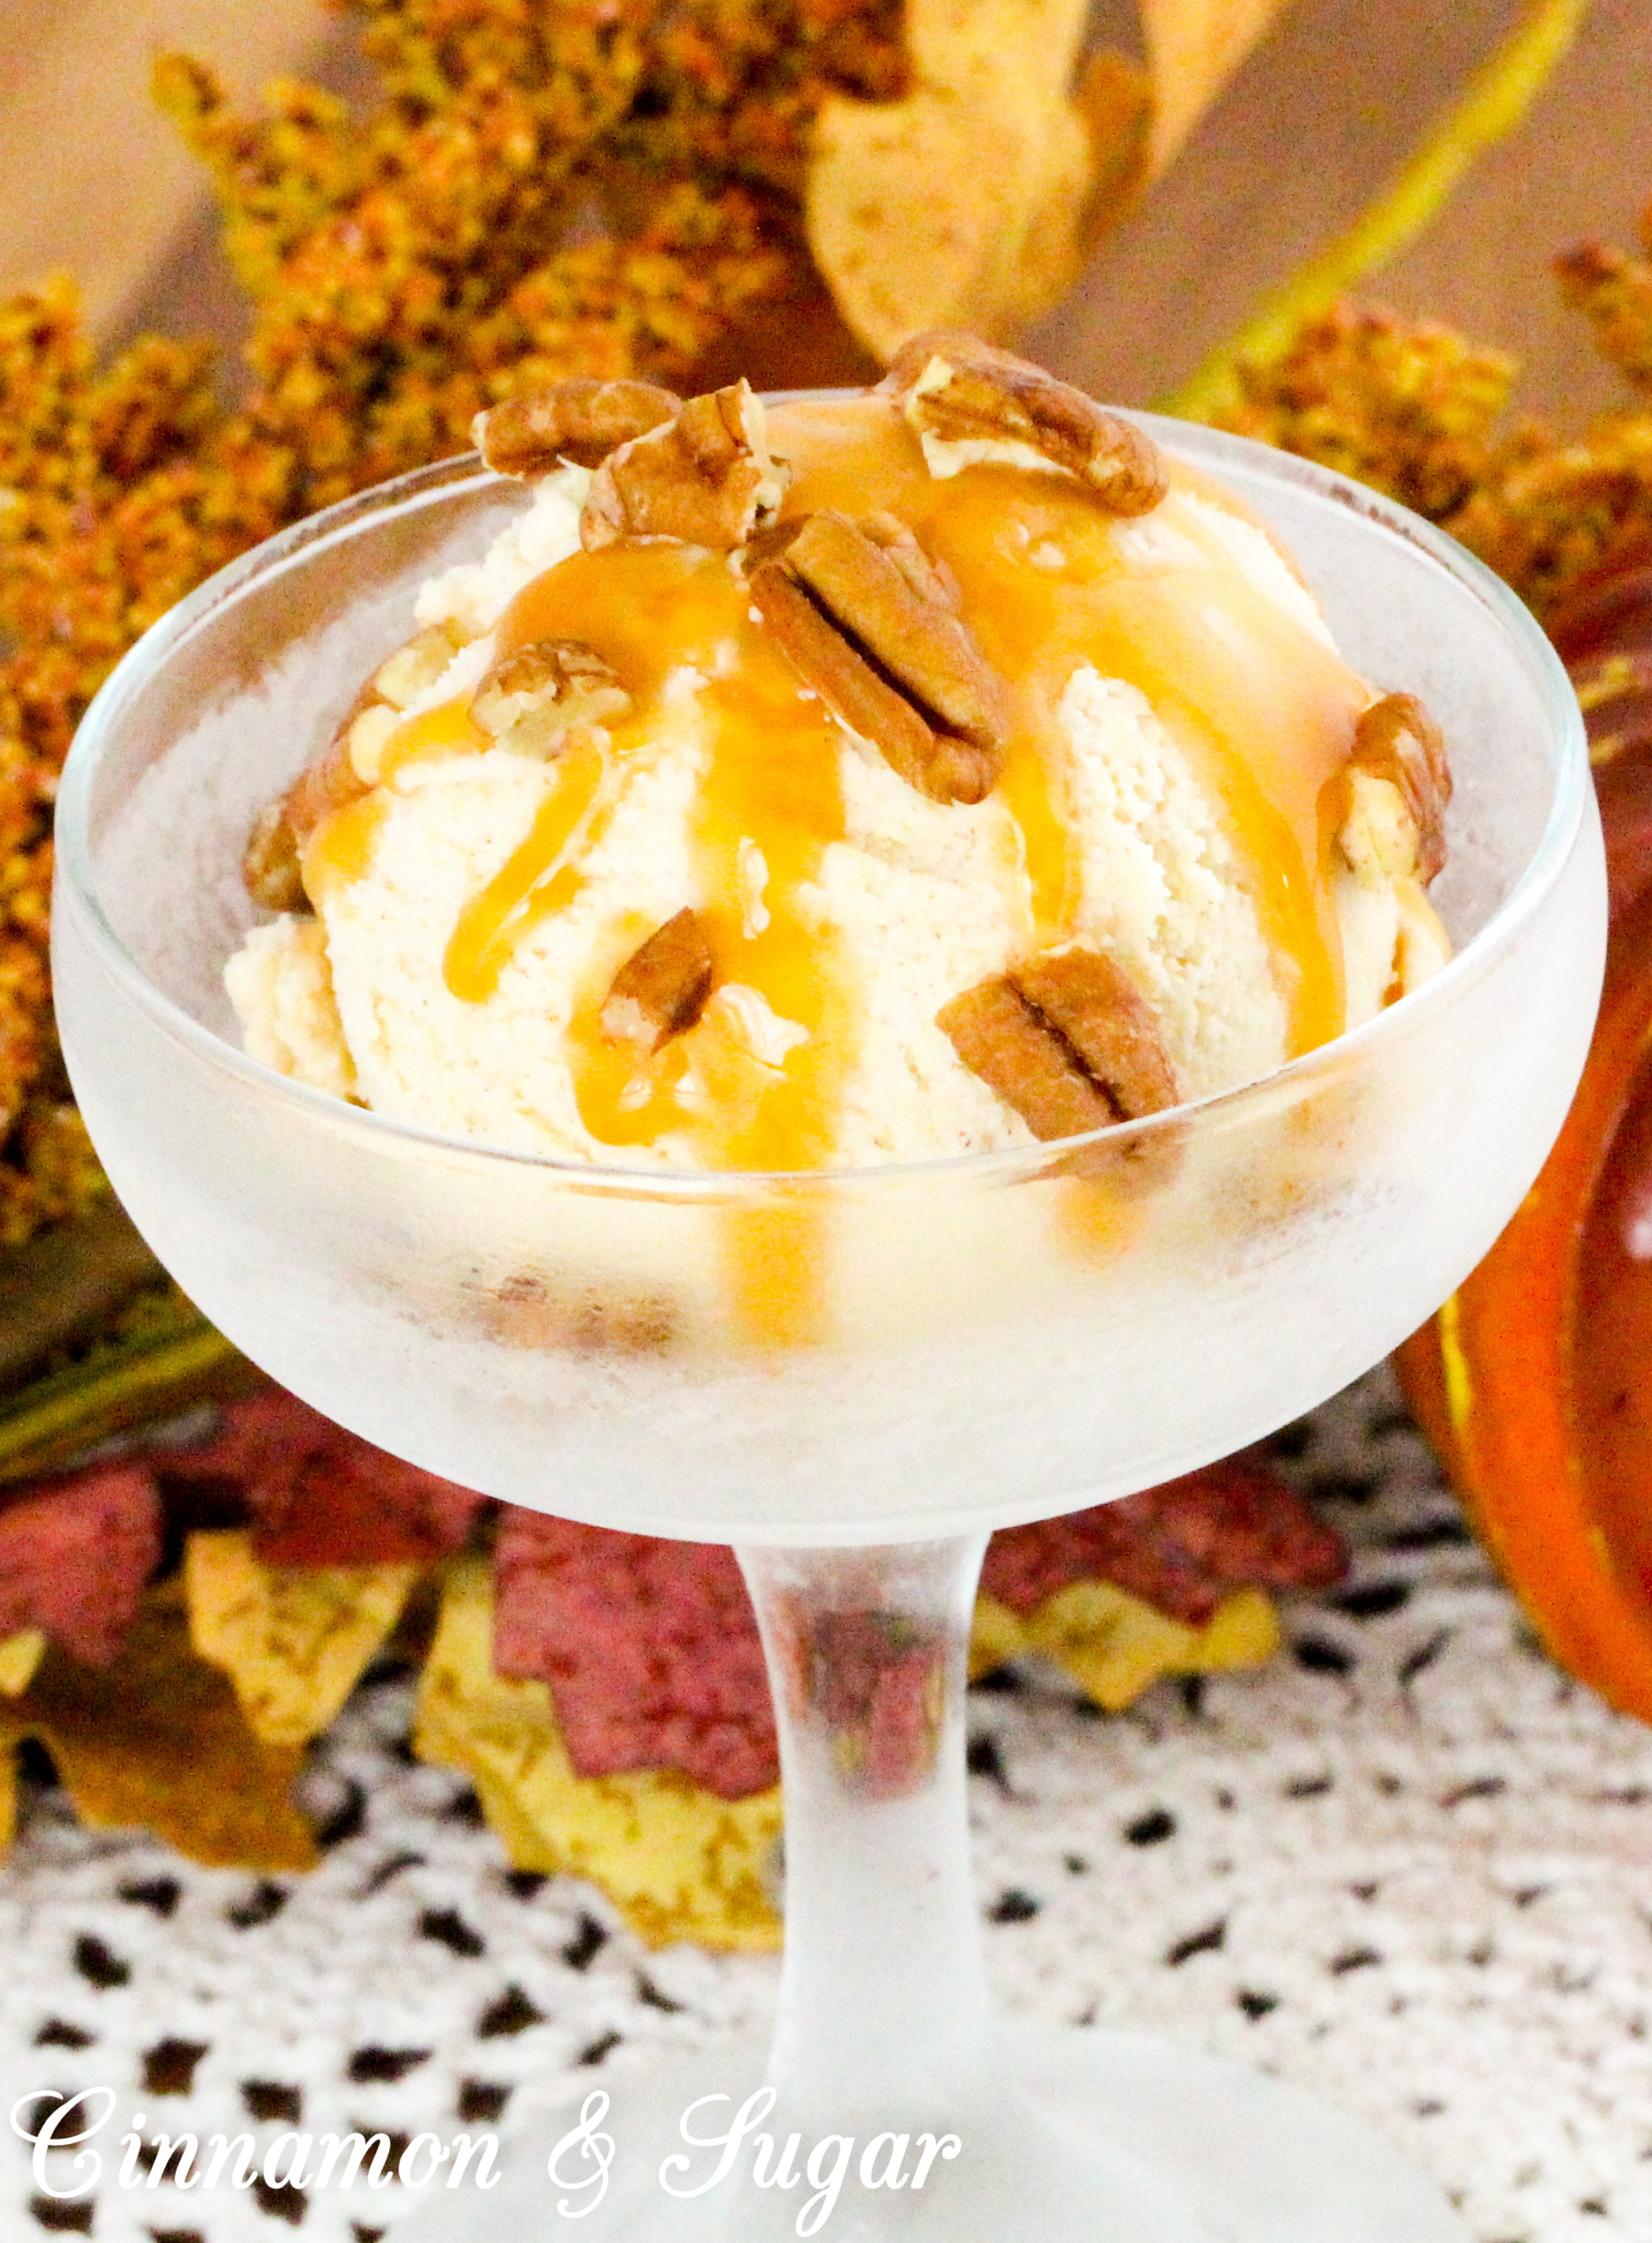 Chagrin Falls Pumpkin Spice Ice Cream is luscious and creamy! This frozen concoction has the perfect balance of pumpkin and spices so that one doesn’t overwhelm the other. Recipe shared with permission granted by Abby Collette, author of A DEADLY INSIDE SCOOP.